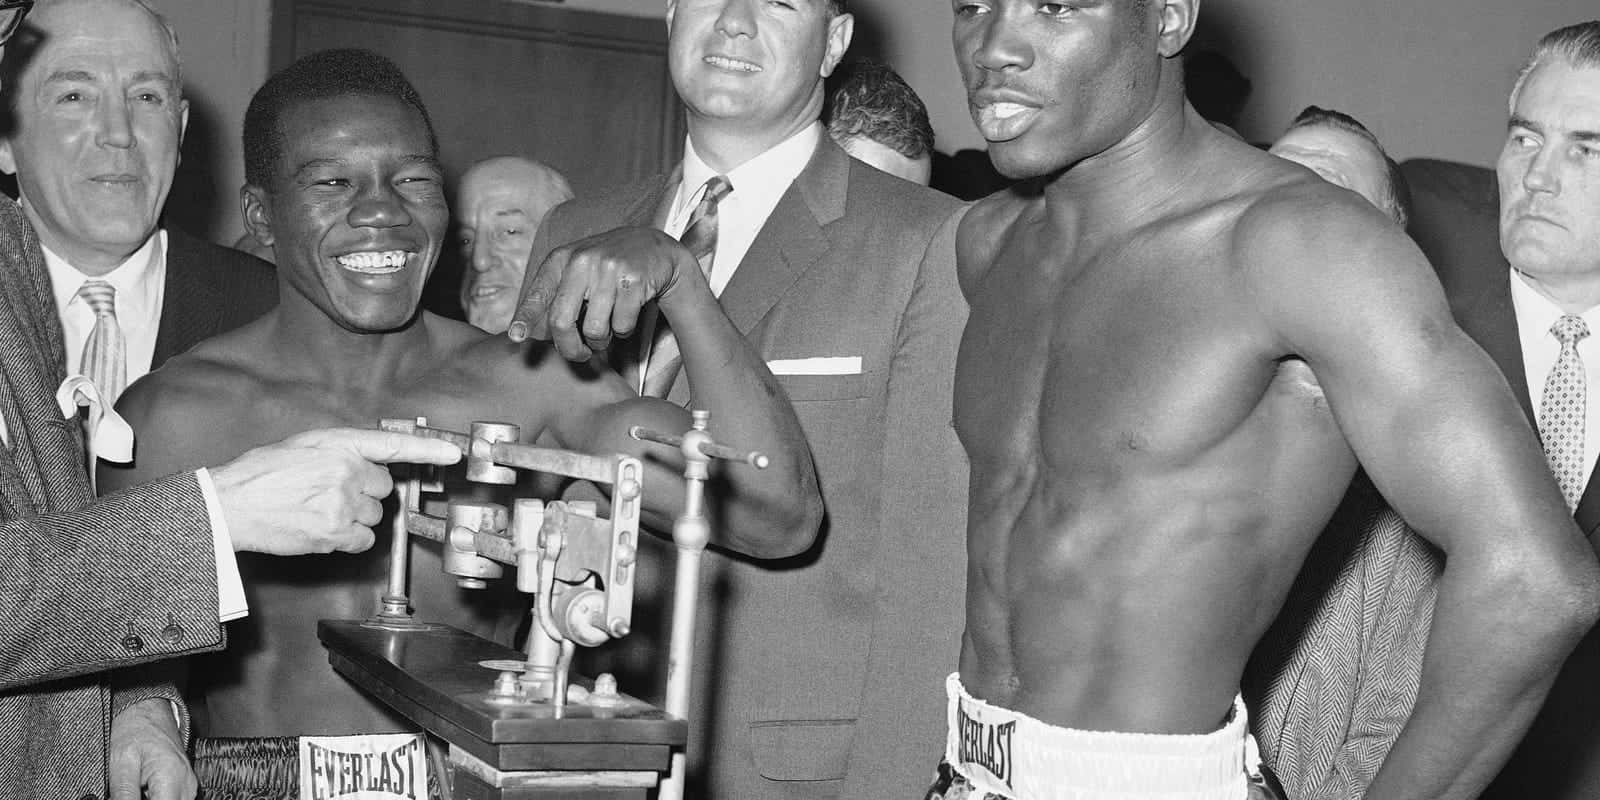 Emile Griffith Benny Paret Weighing Picture